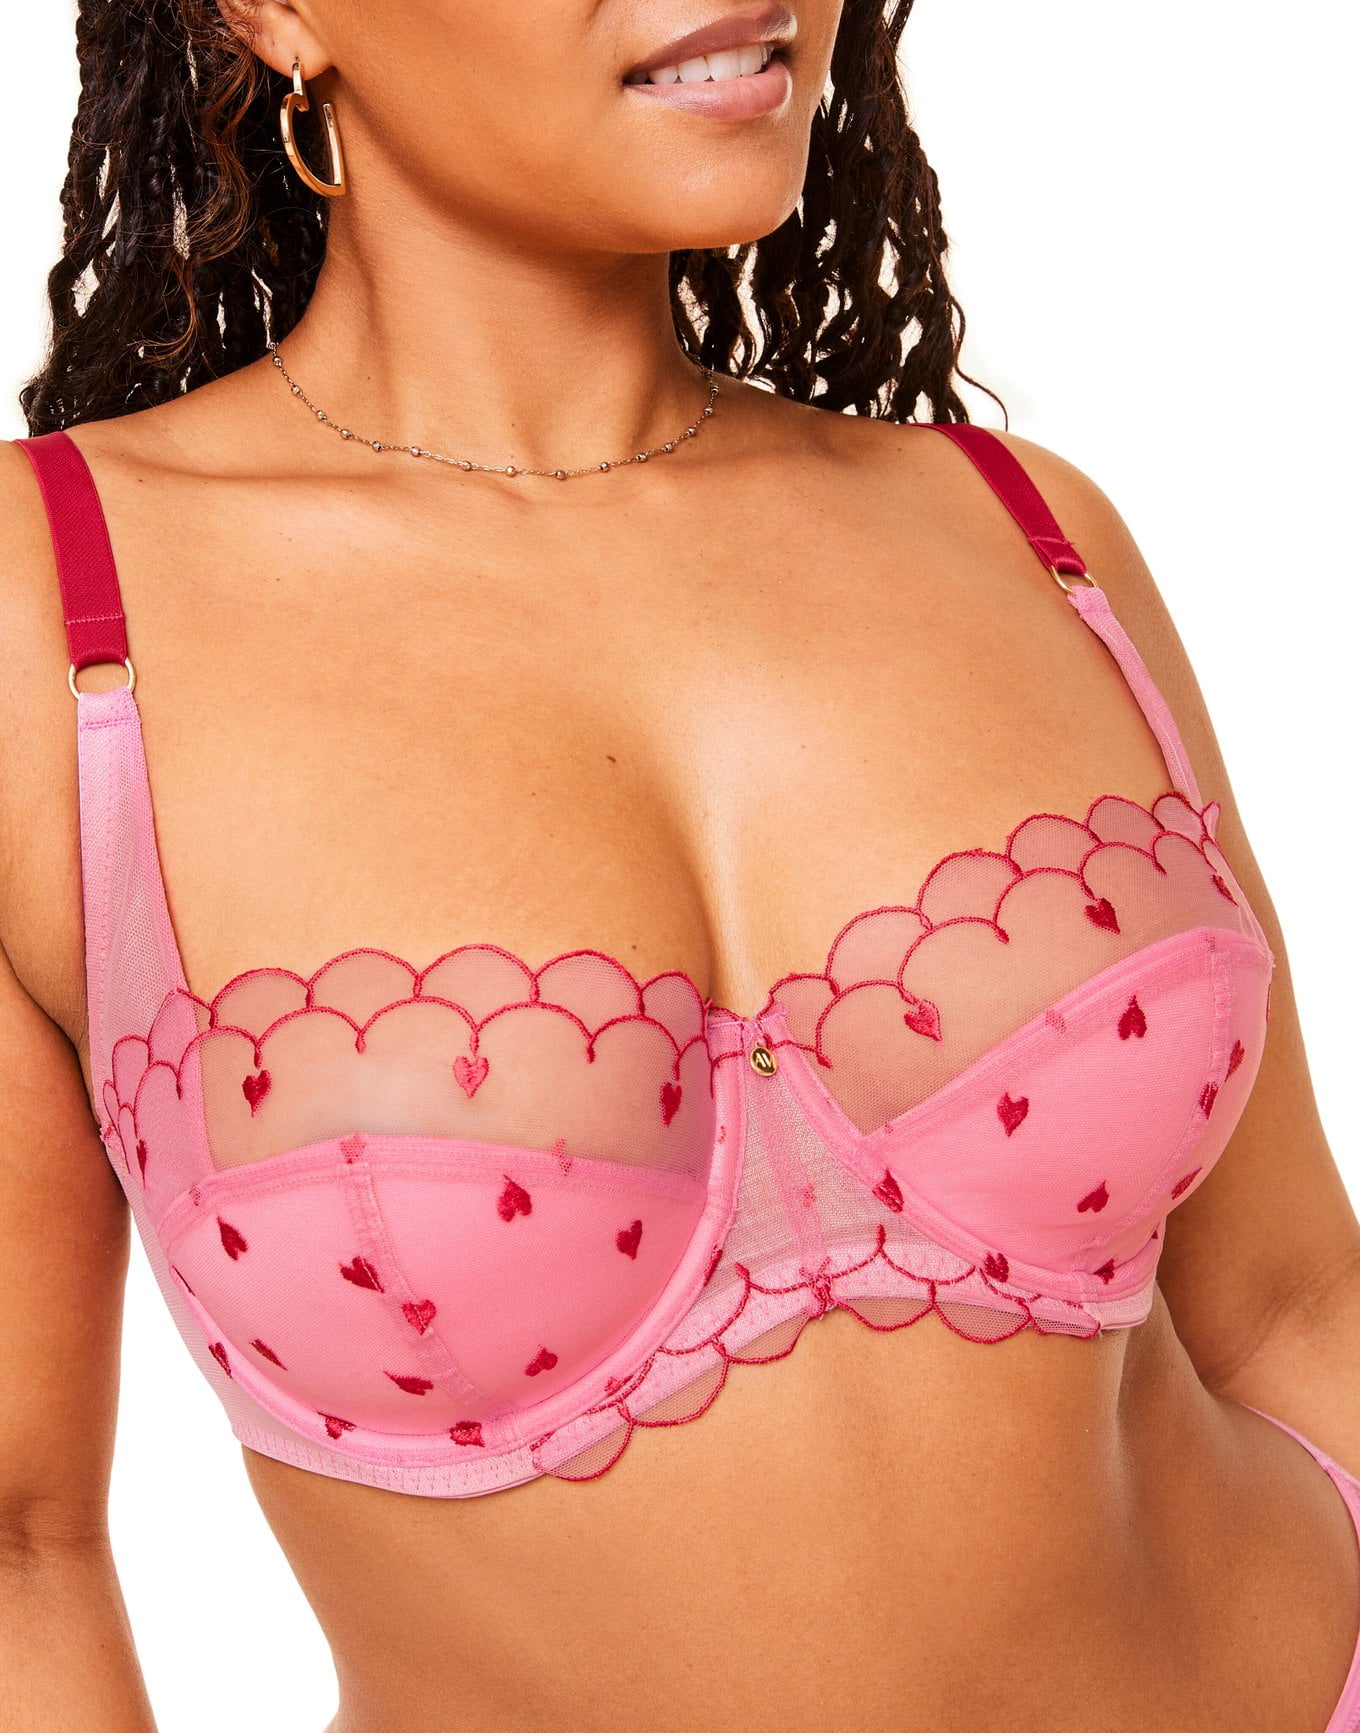 Brand Adore Me, sizes Bras 40C and Panty L / Bras 42C and Pantie